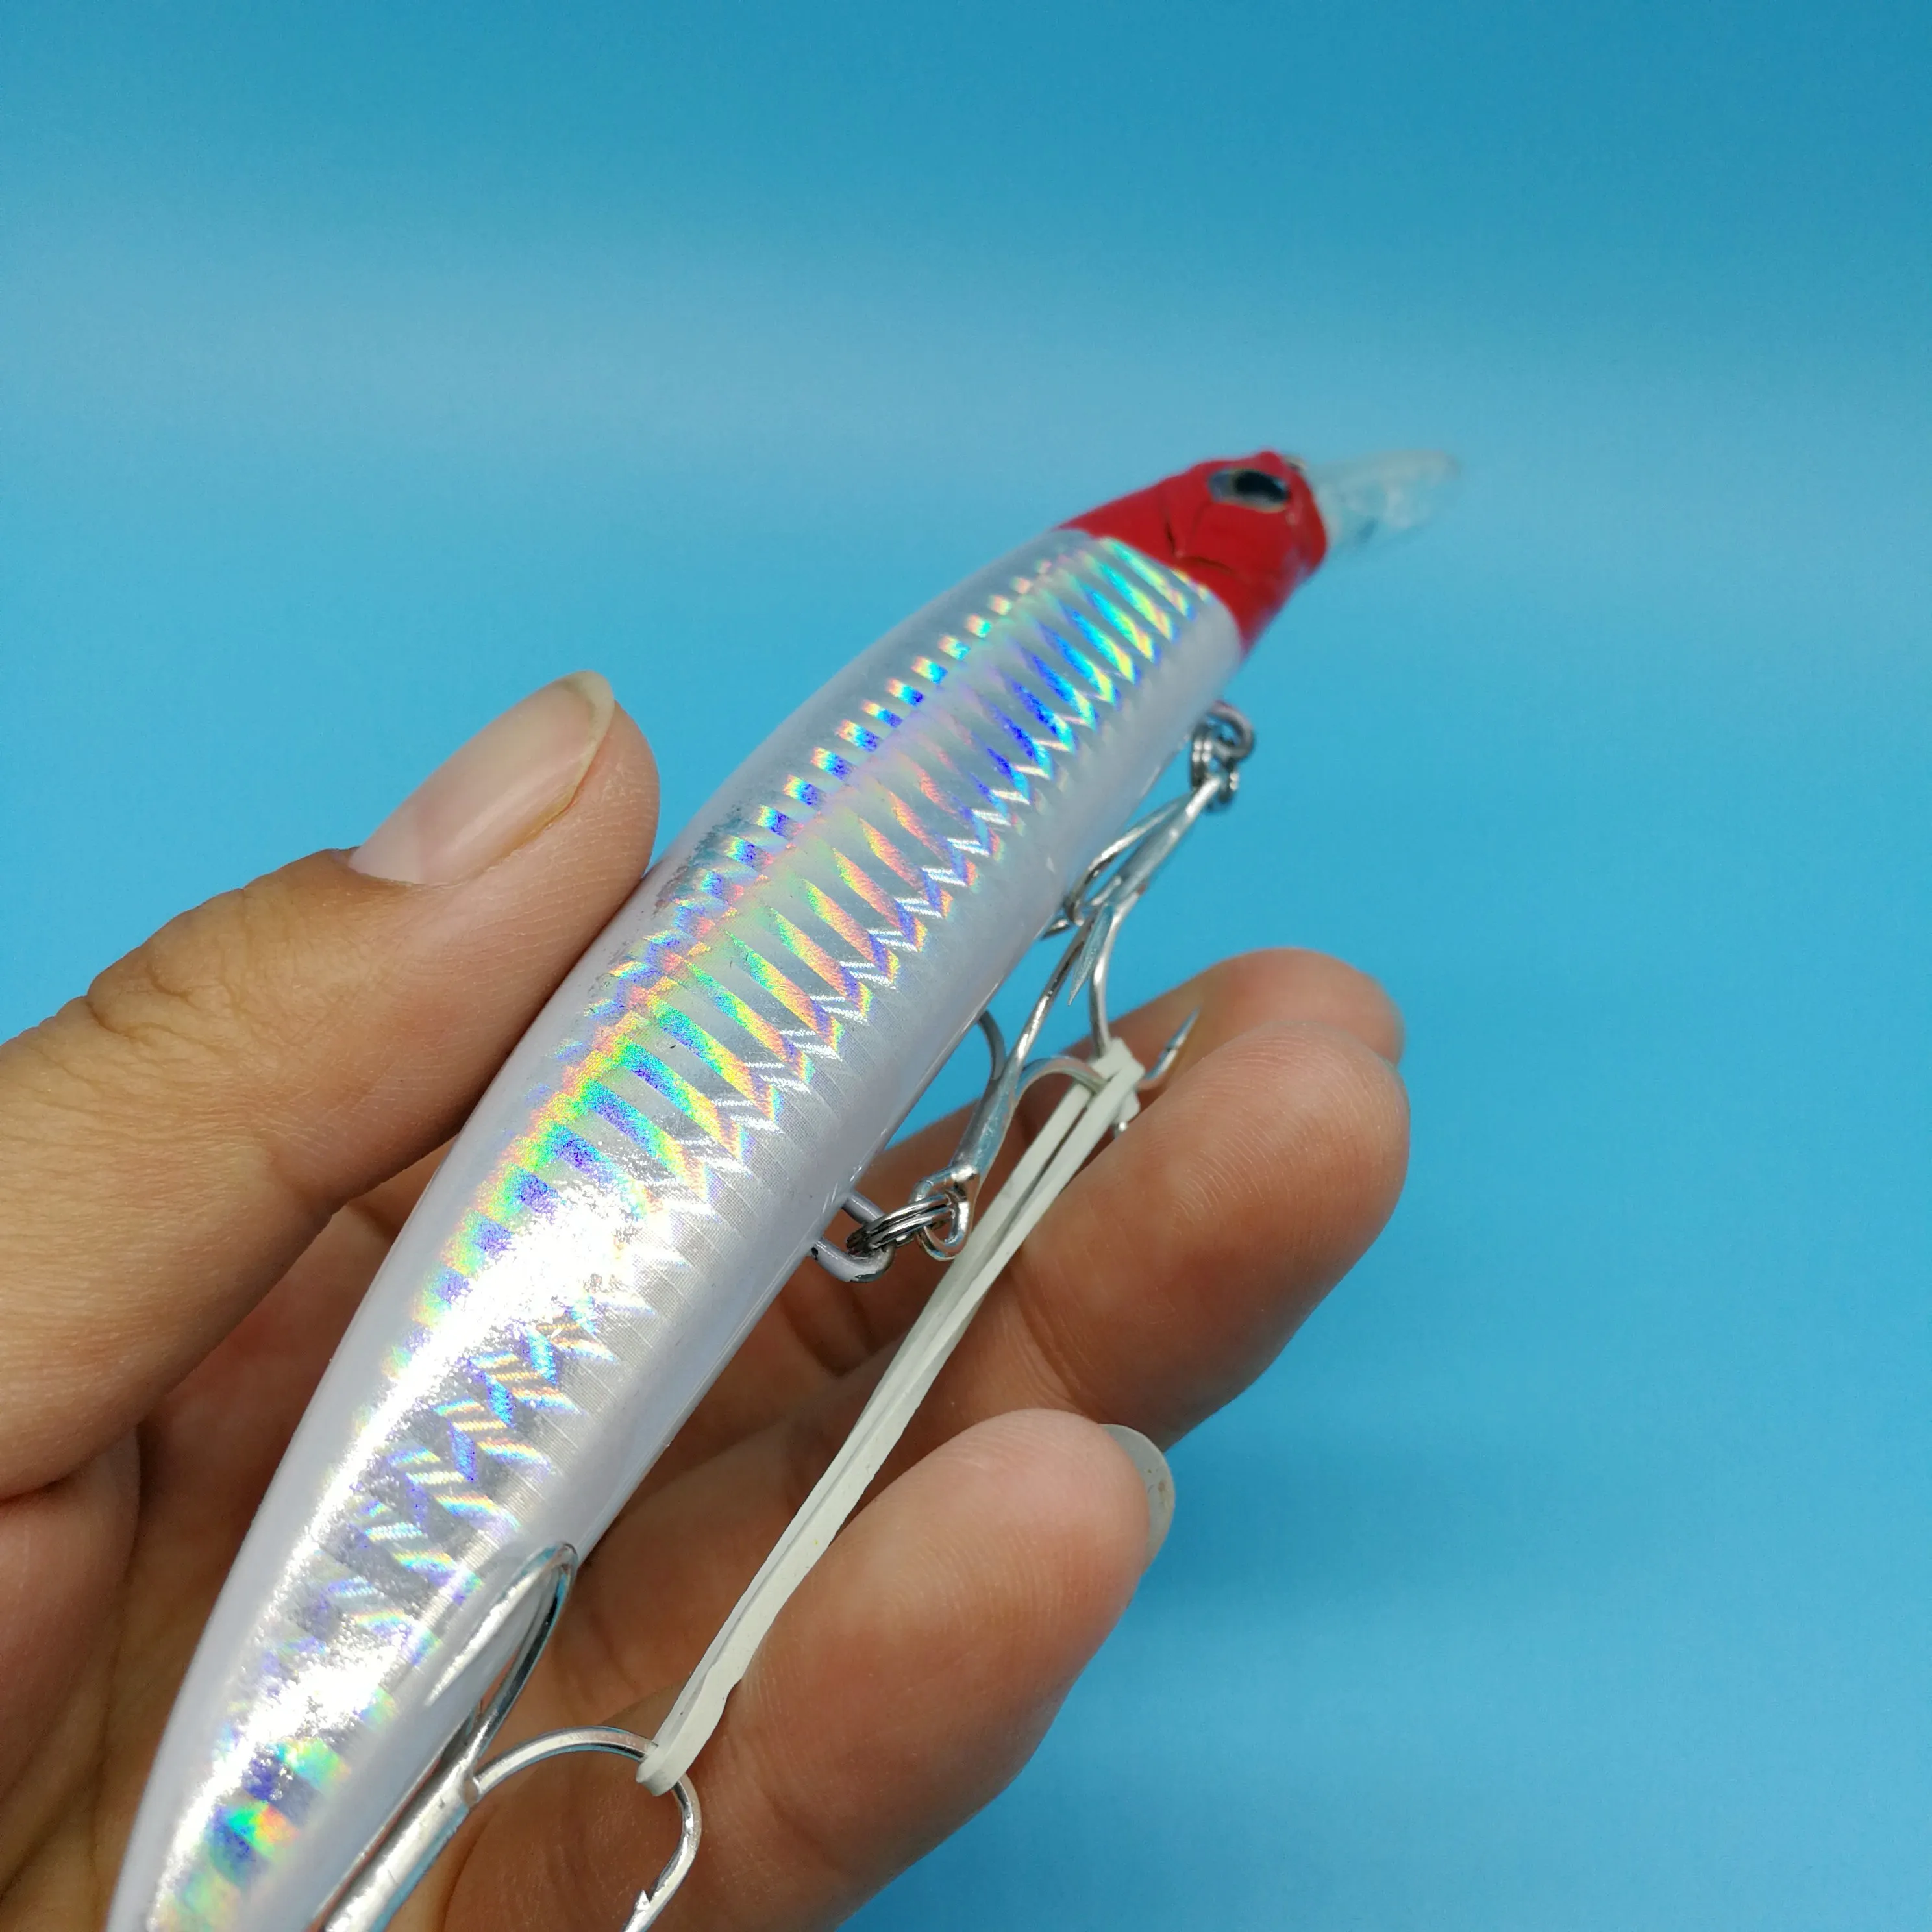 NOEBY 2 Pieces 2019 NEW Floating Minnow Fishing Lure 23g 130mm 4colors  Depth 0-1 5m Wobbler Hard Bait Saltwater Fishing Tackle T20274g